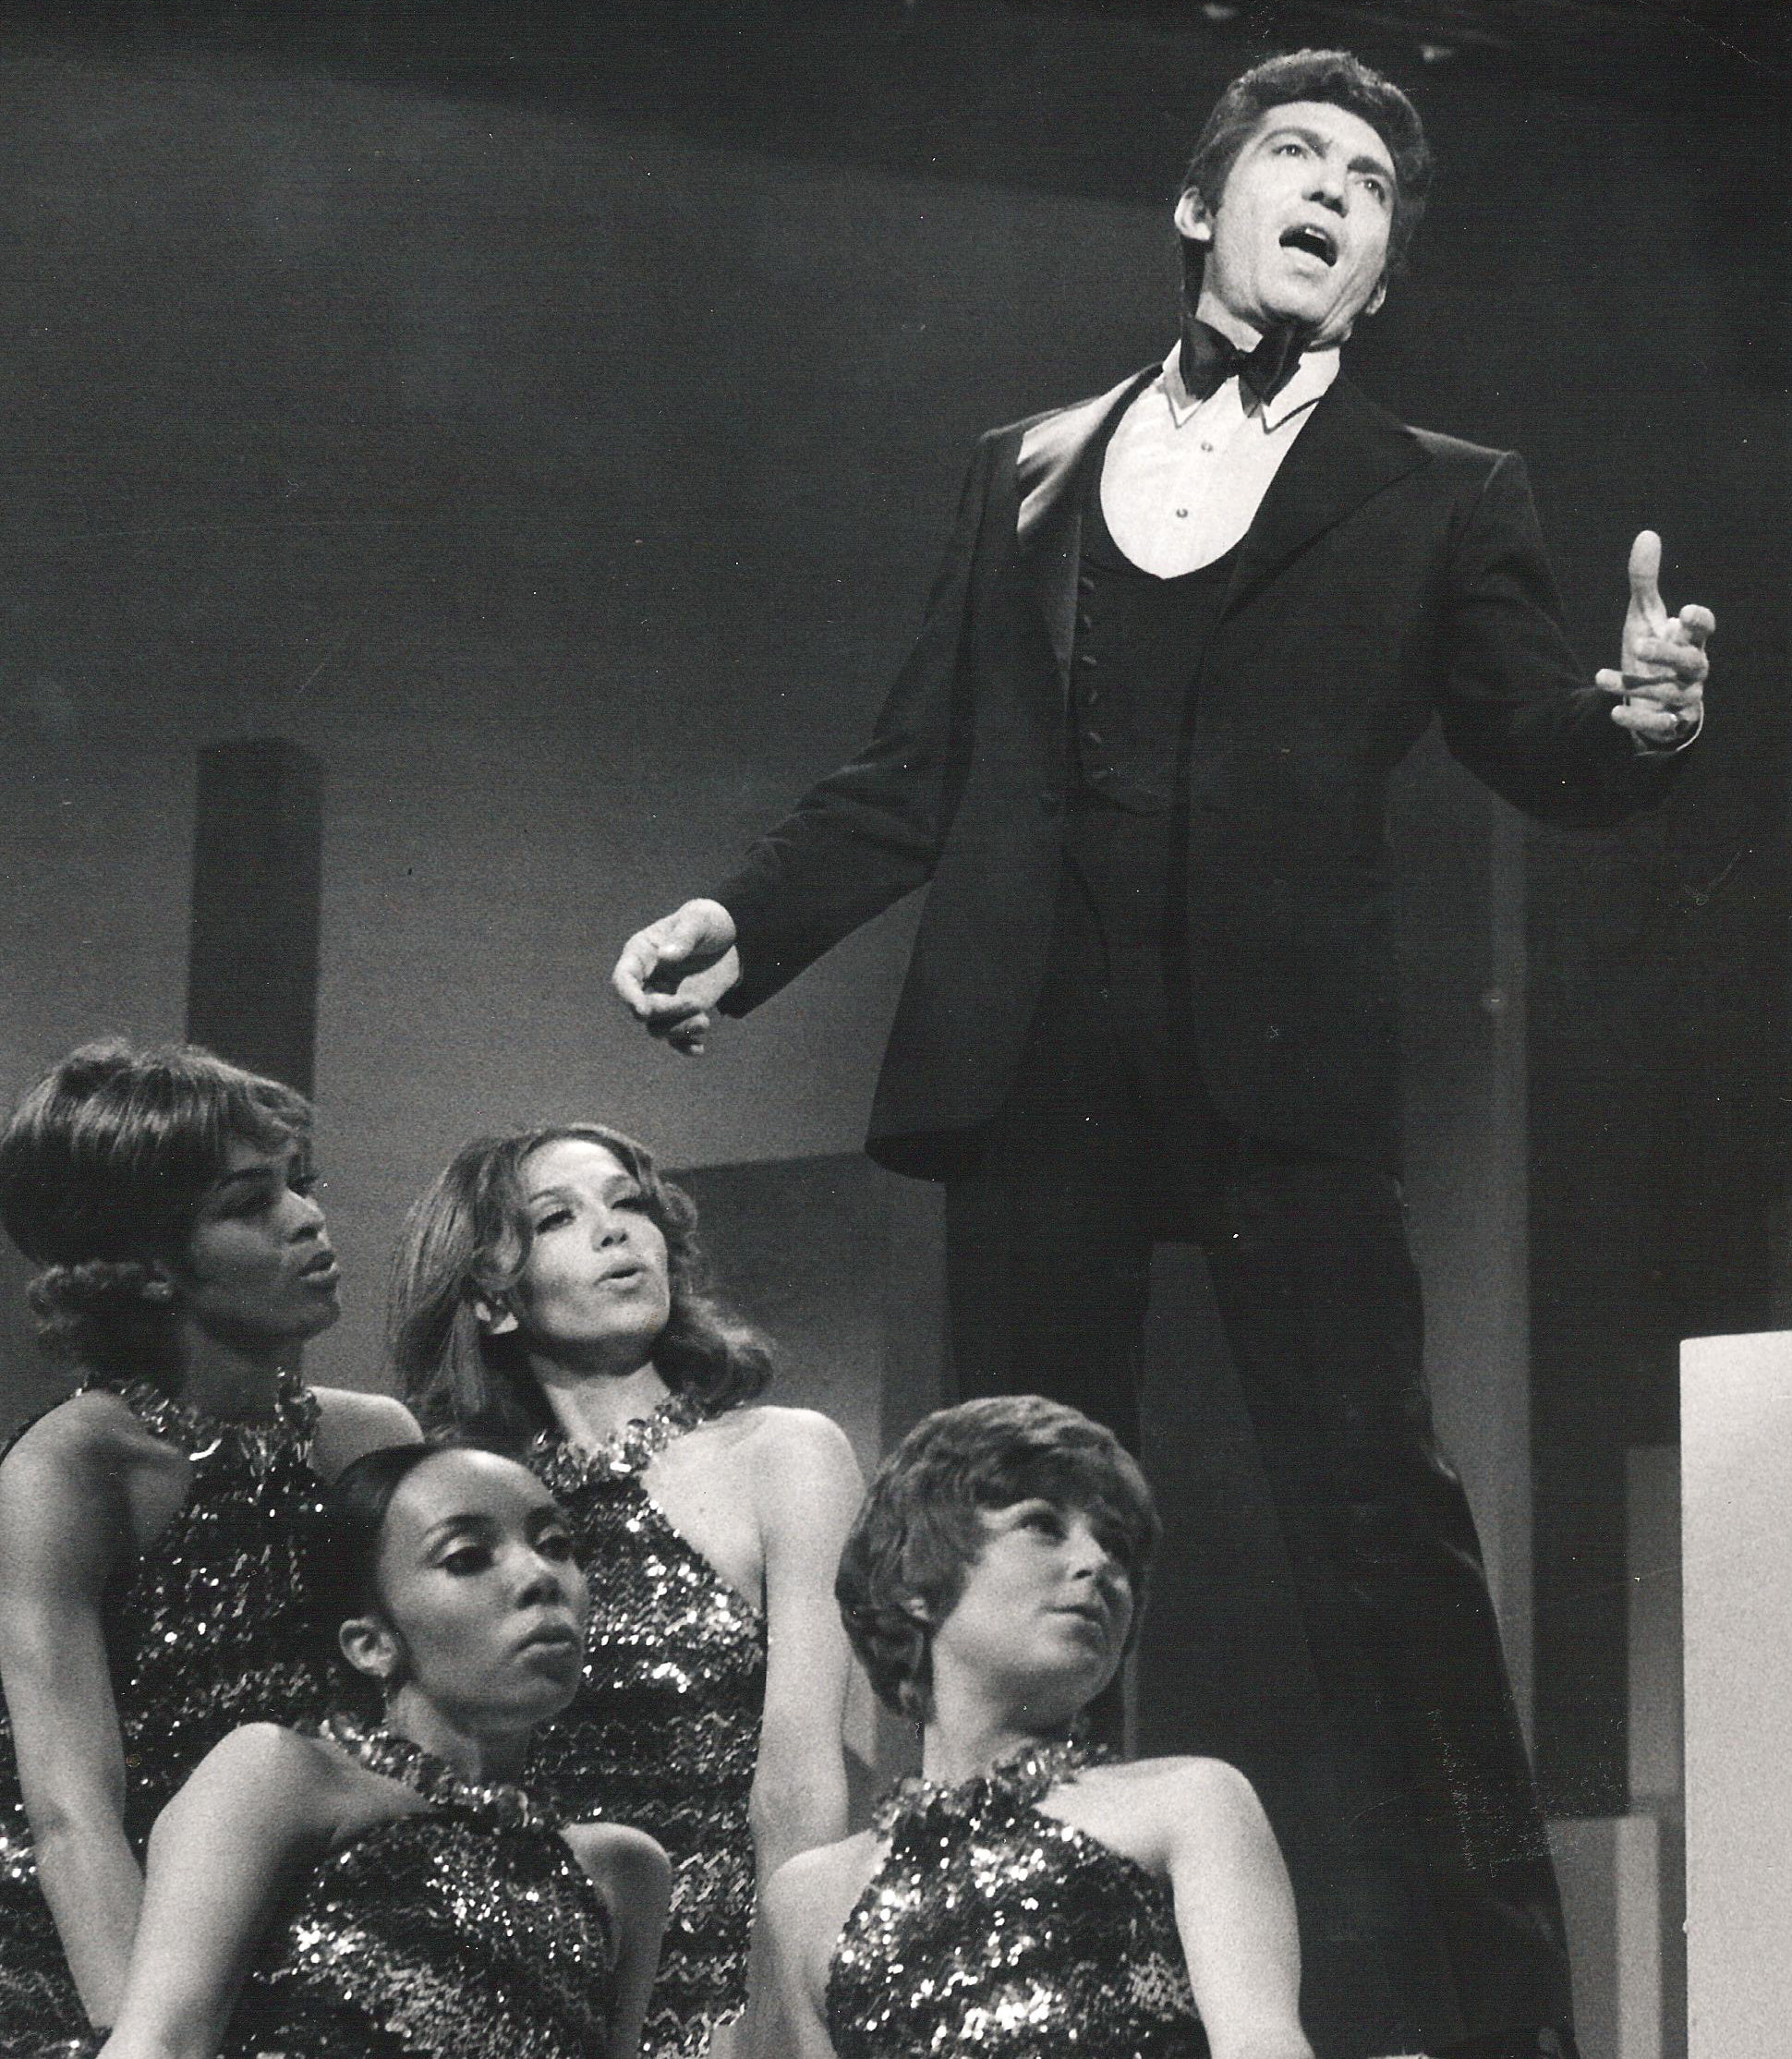 Photo of Sergio Franchi performing on the Ed Sullivan Show.